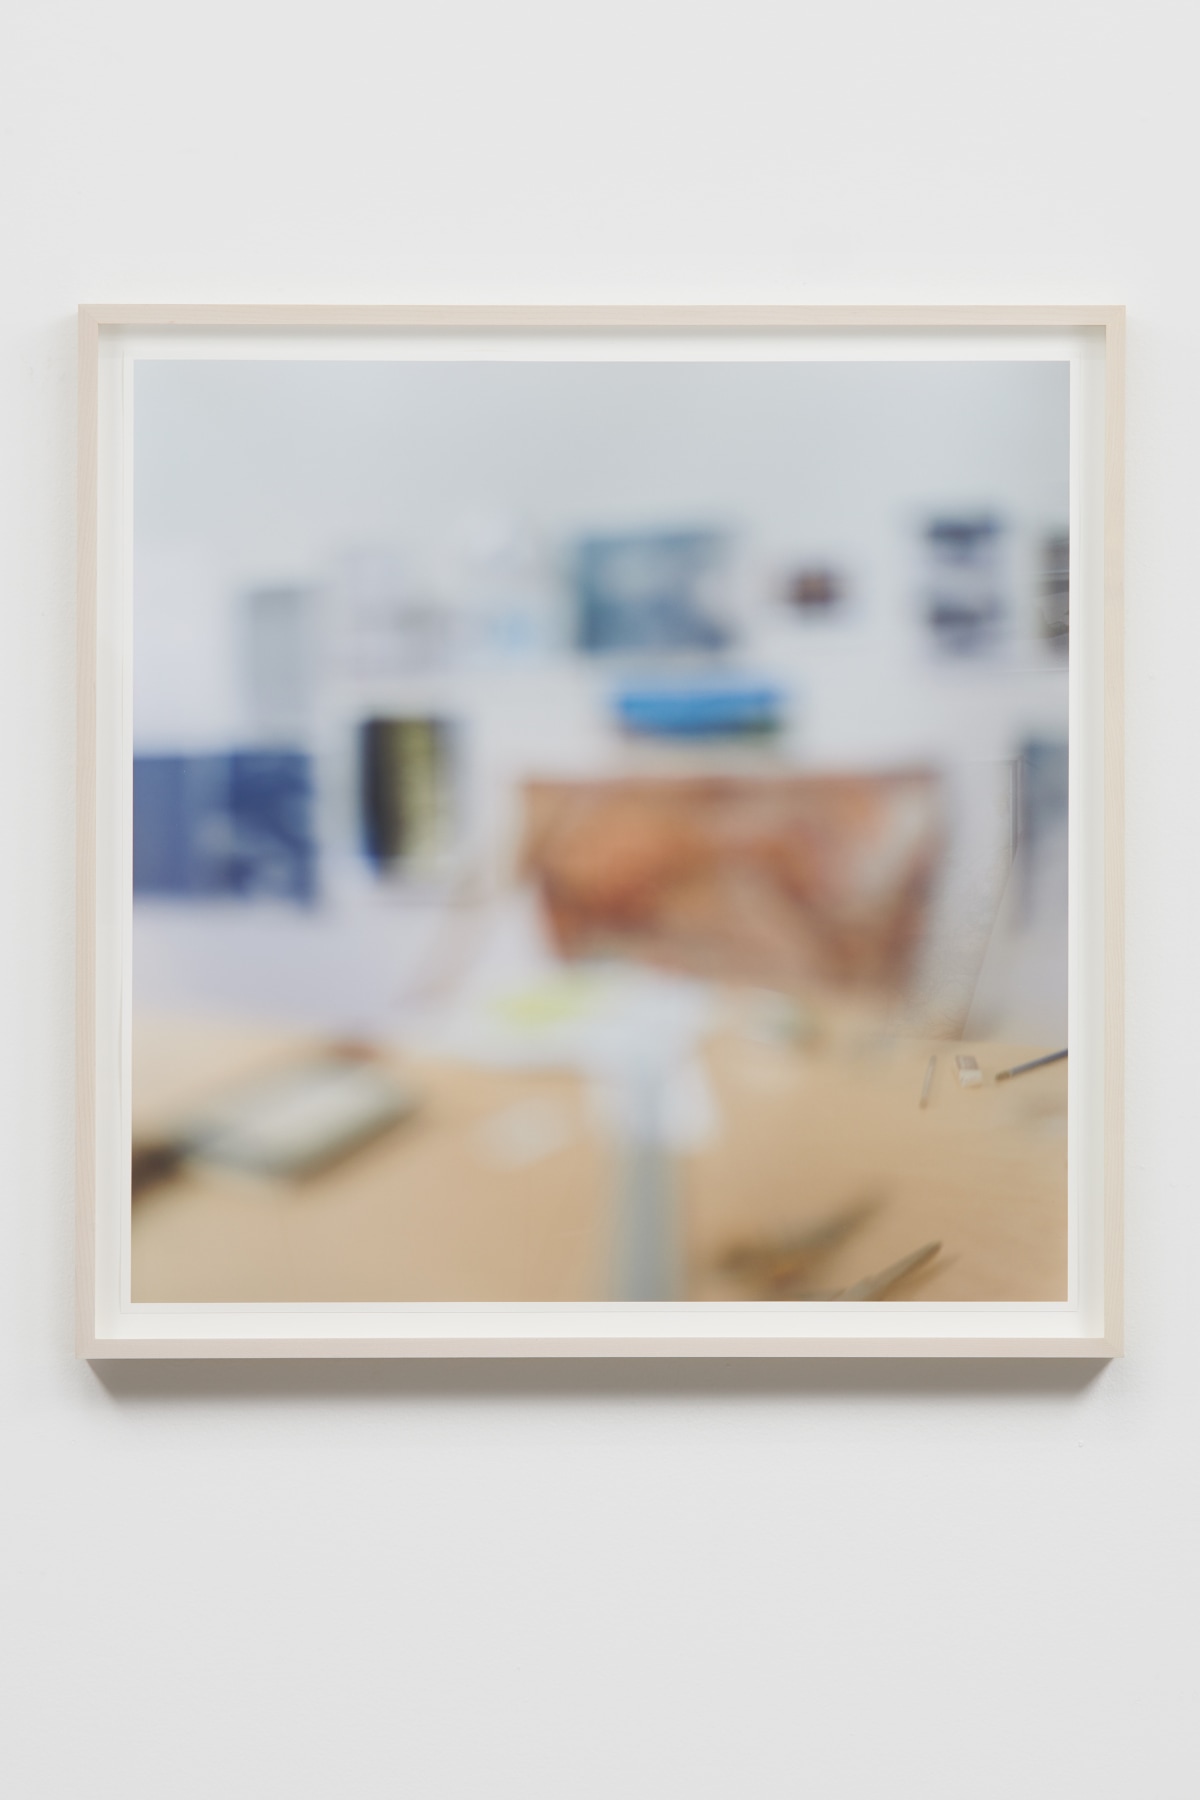 Image of SPENCER FINCH's Trying to See Clearly (studio wall through my right spectacle lens), 2018